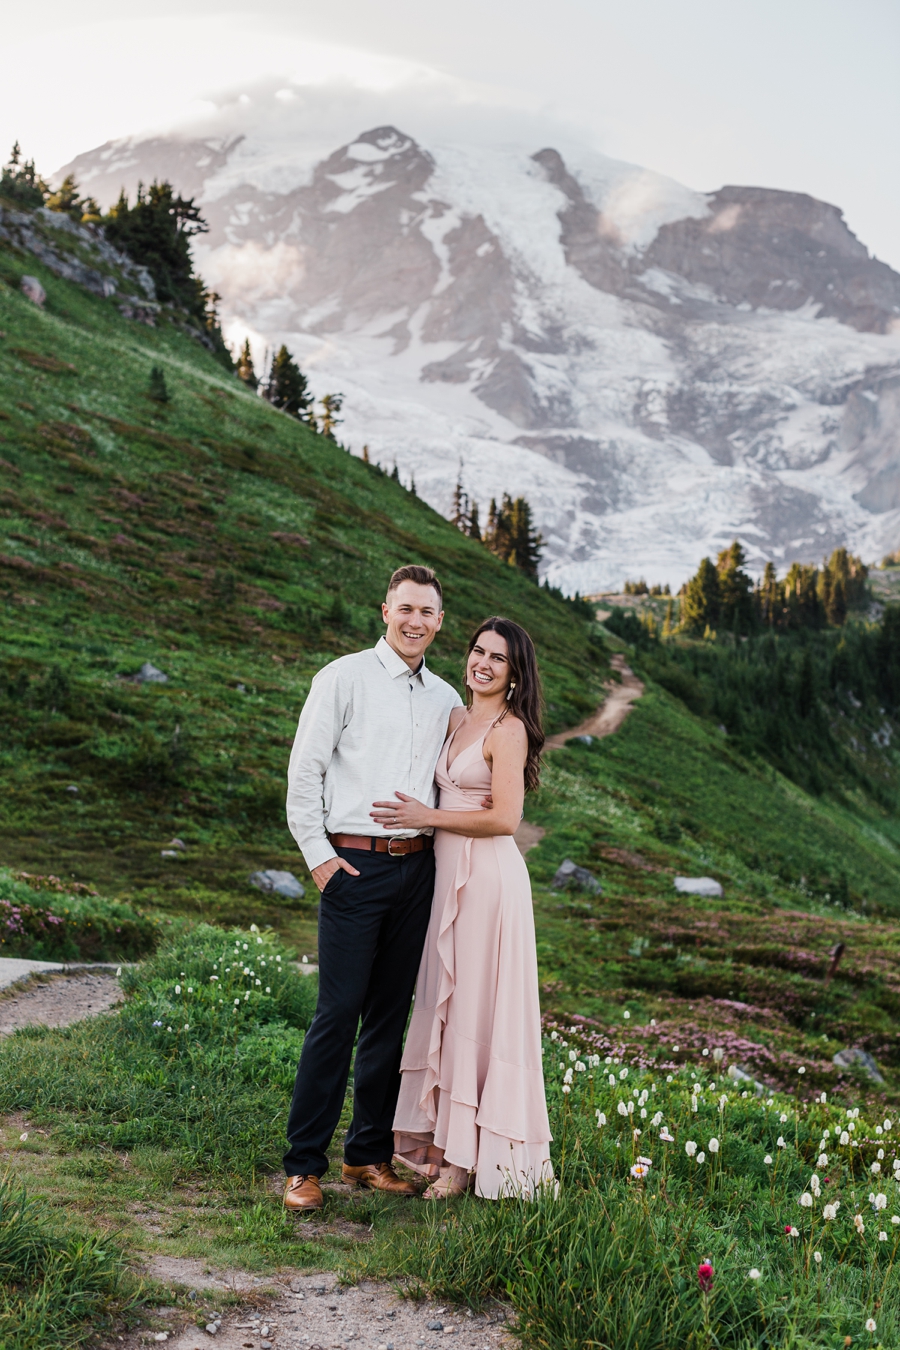 A couple stands together backdropped by stunning Mt Rainier at sunset